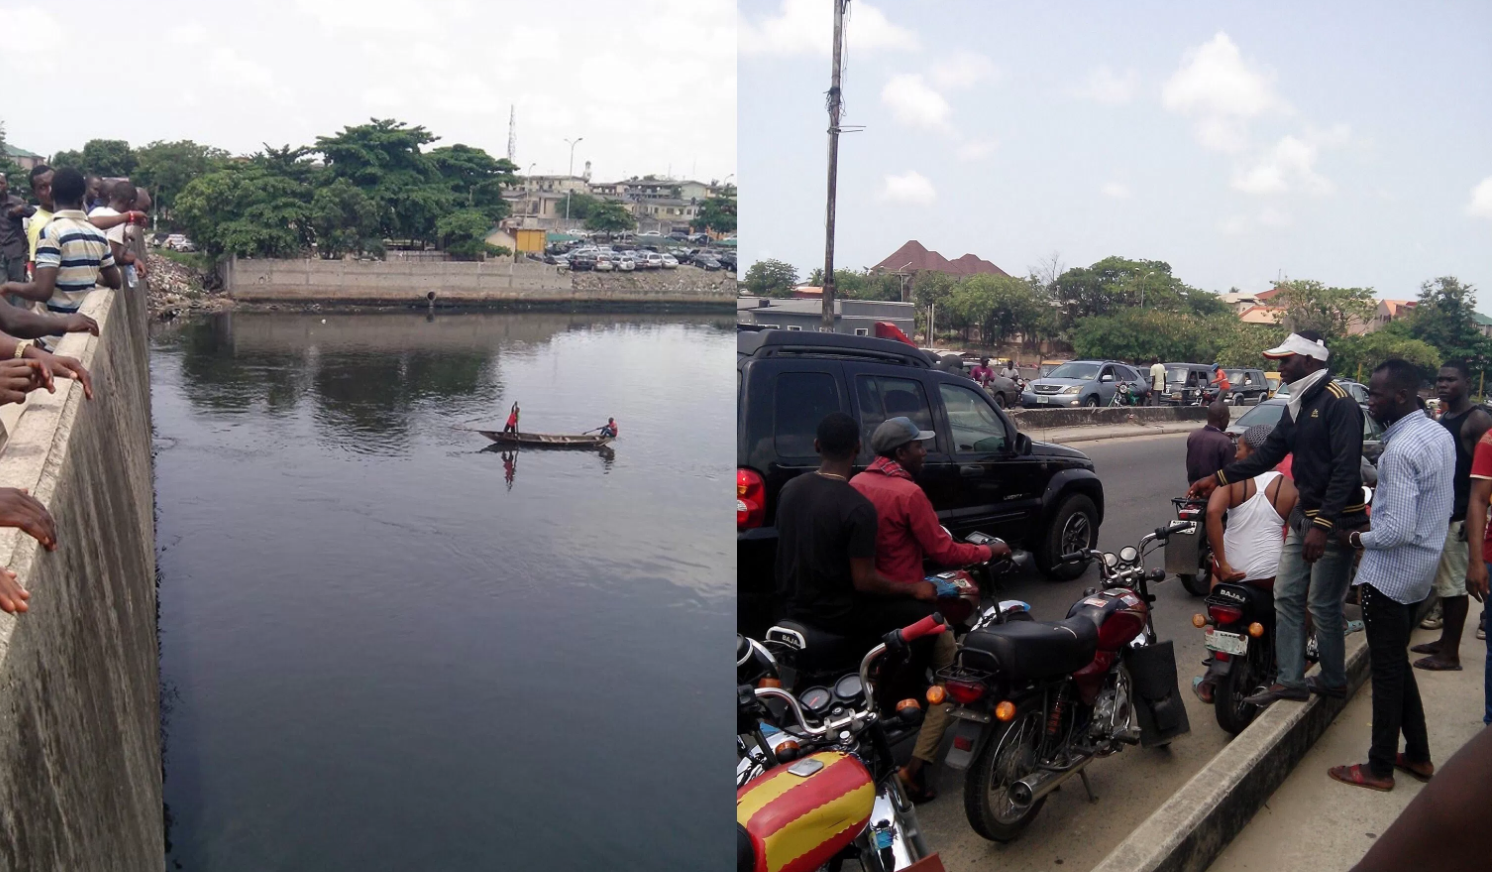 Man Jumps Into canal in Lagos